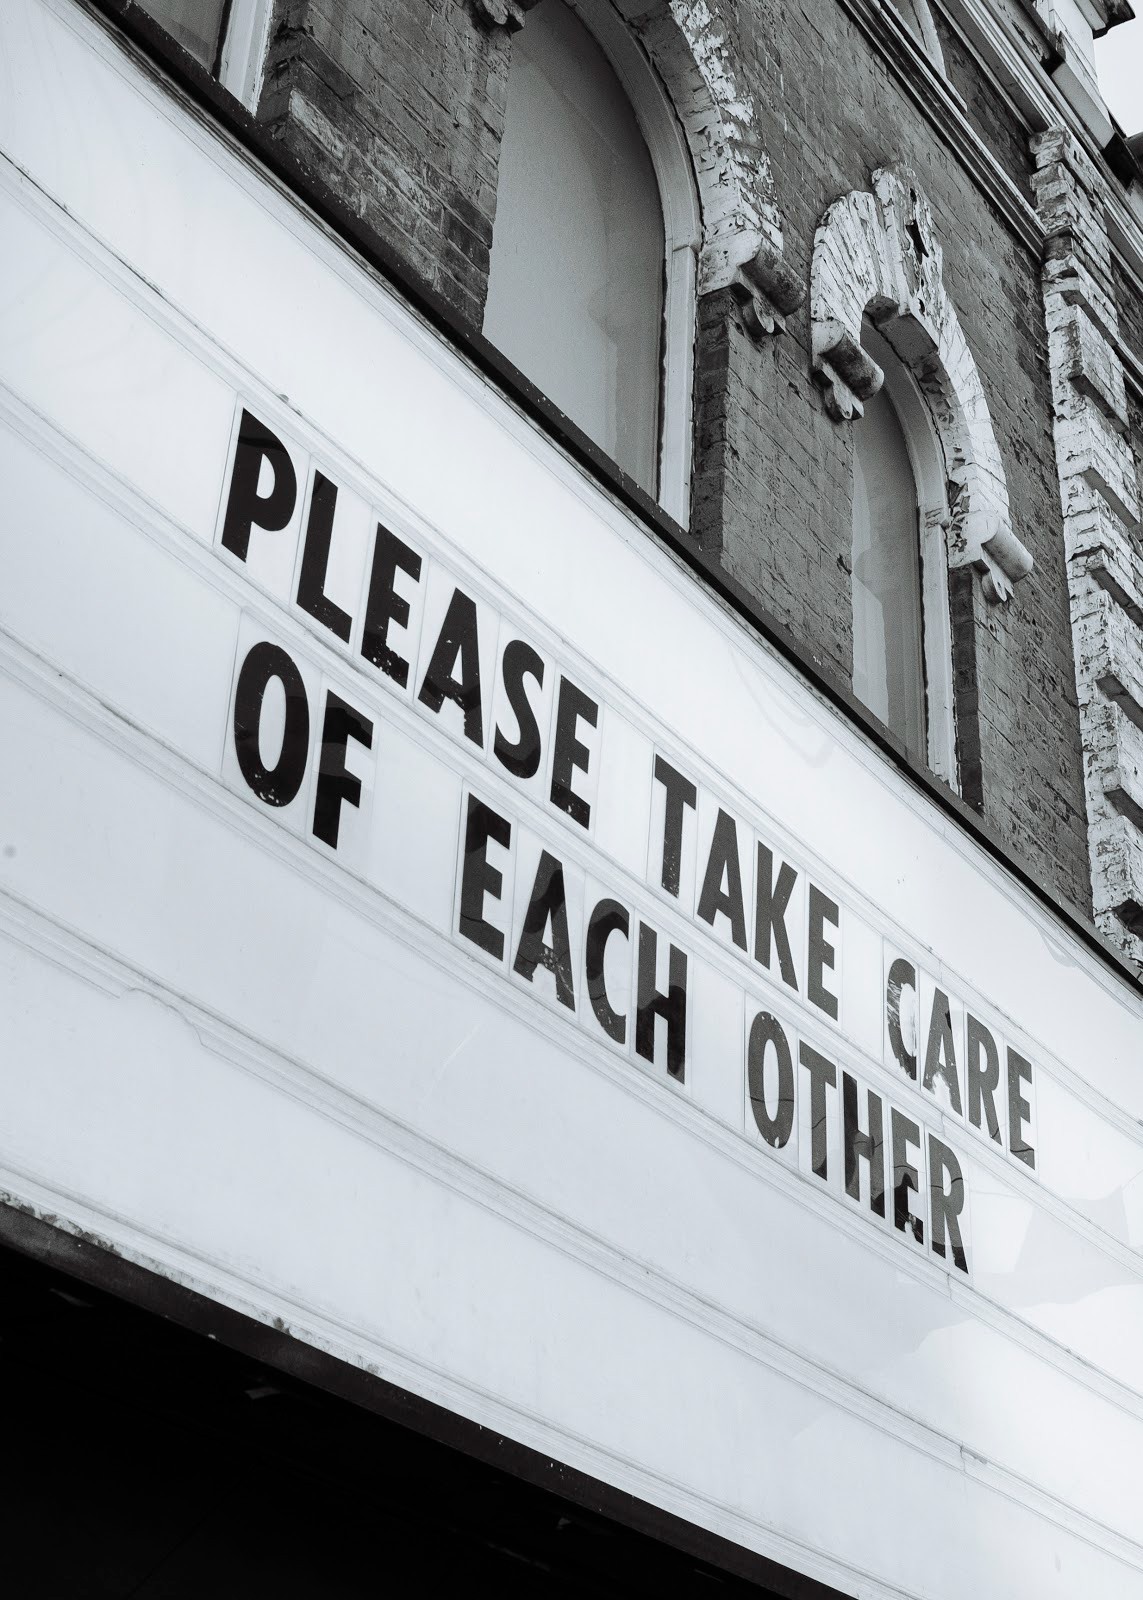 Marquee Sign that reads "Please Take Care of Each Other".